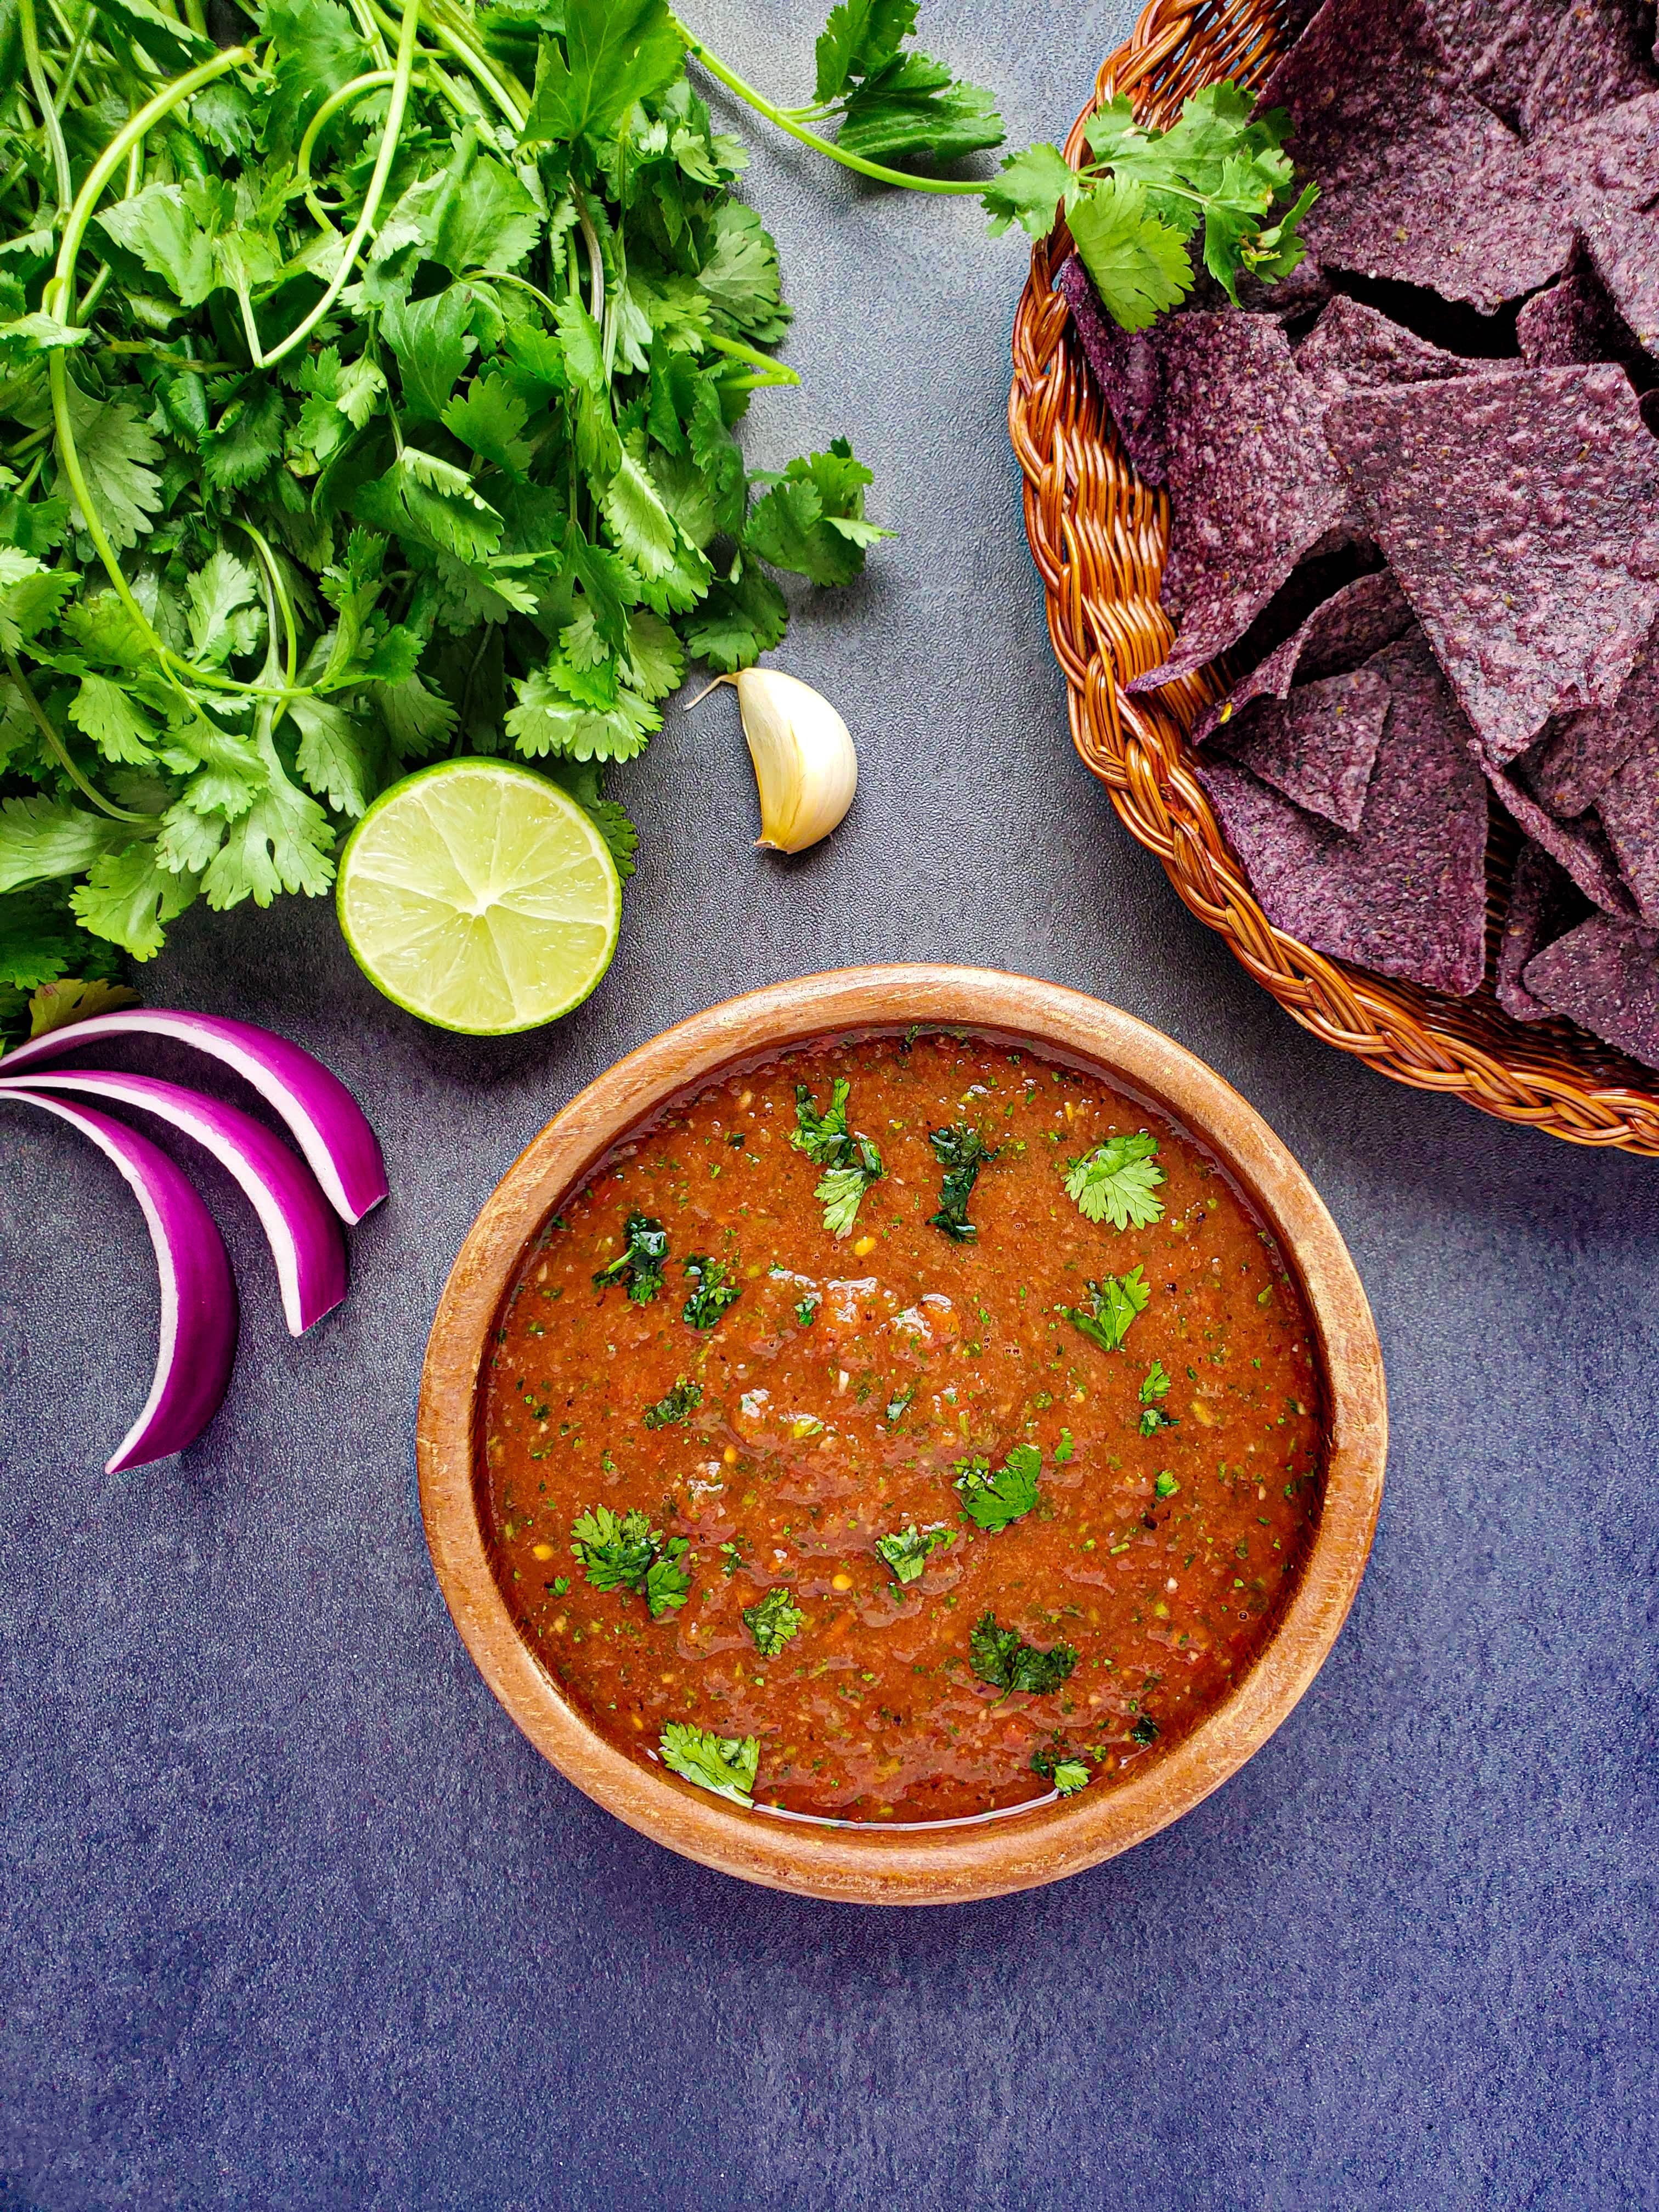 a bowl of mexican restaurant salsa with sliced red onion, a cut lime, a garlic clove, fresh cilantro and blue tortilla chips above the bowl of salsa